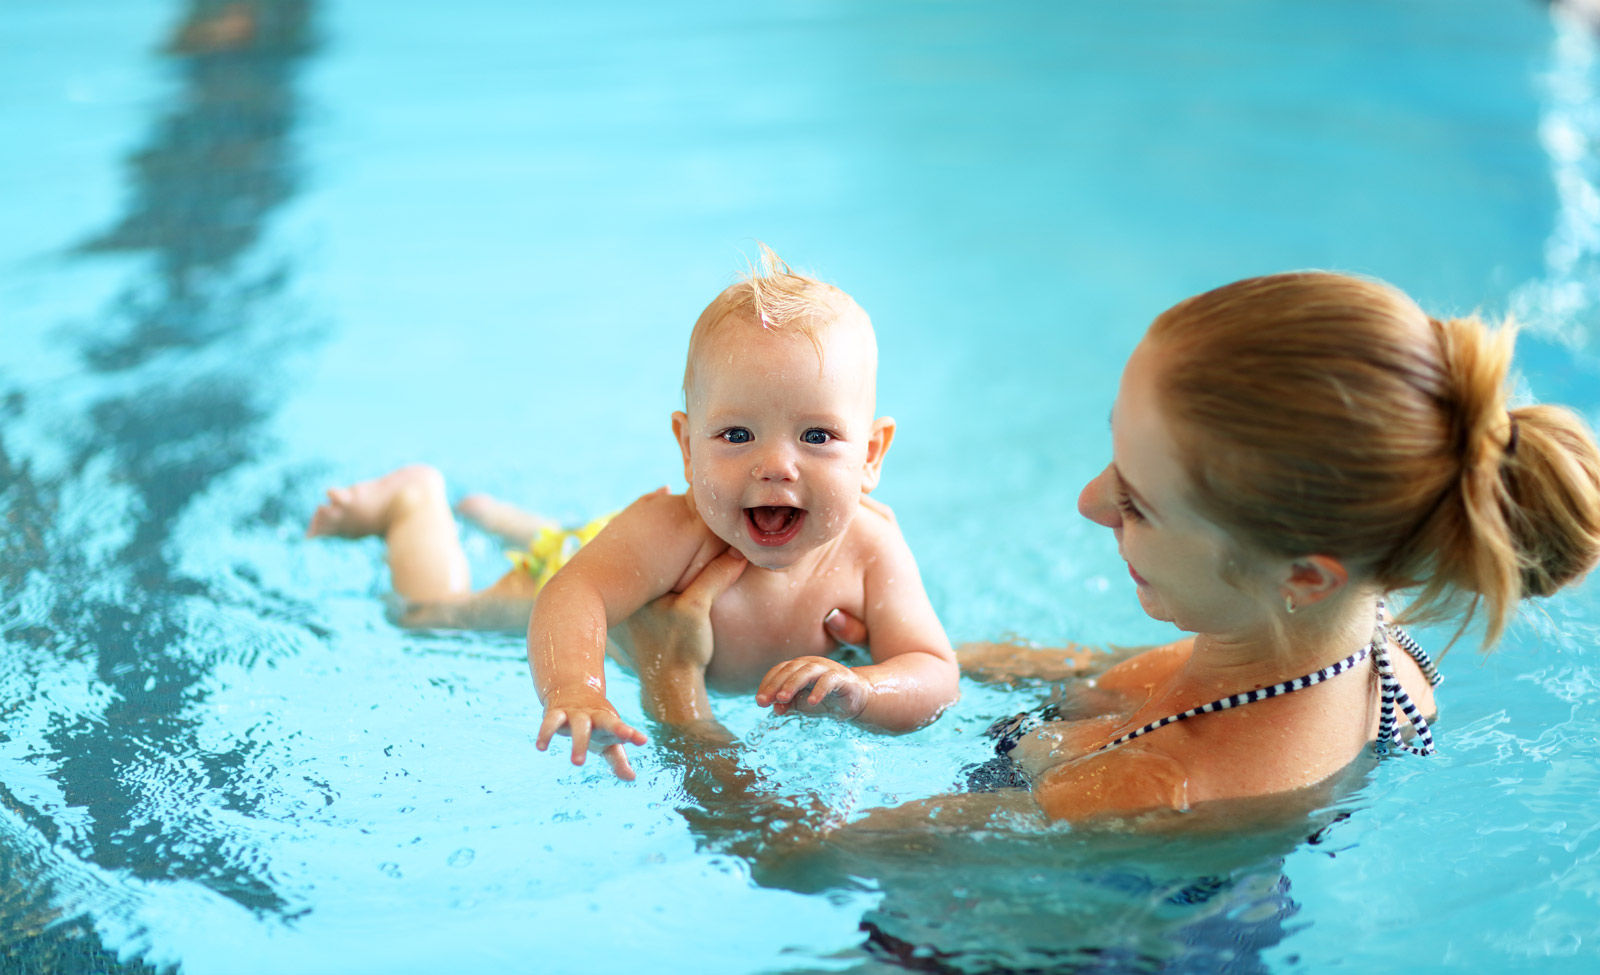 Don’t forget to pack swim diapers if you are staying at a Regina hotel with a swimming pool.